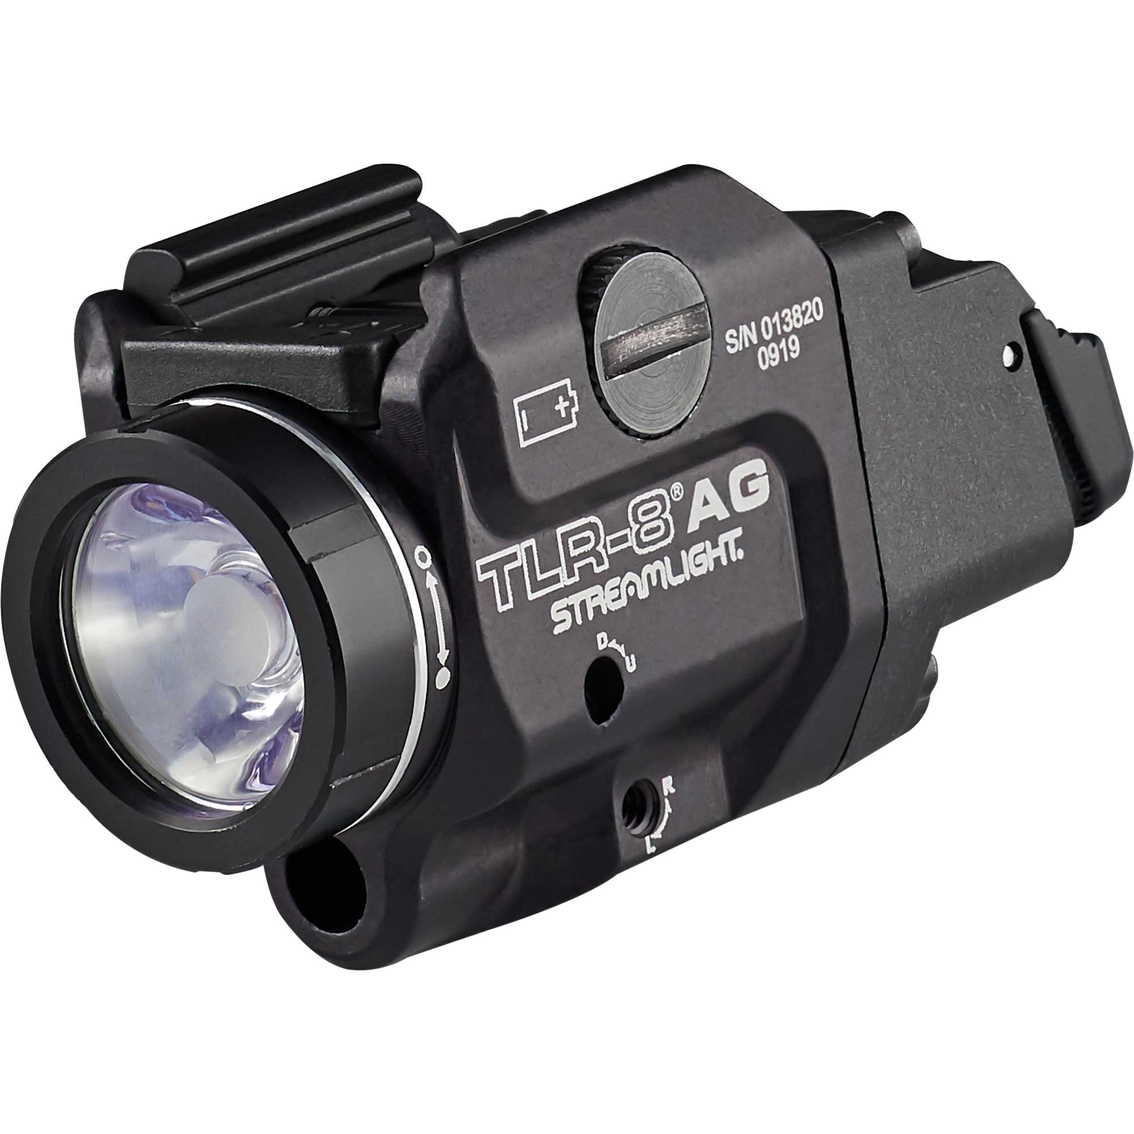 Streamlight TLR 8 A G FLEX Rail Mounted Tactical Light with Green Laser - Image 4 of 5